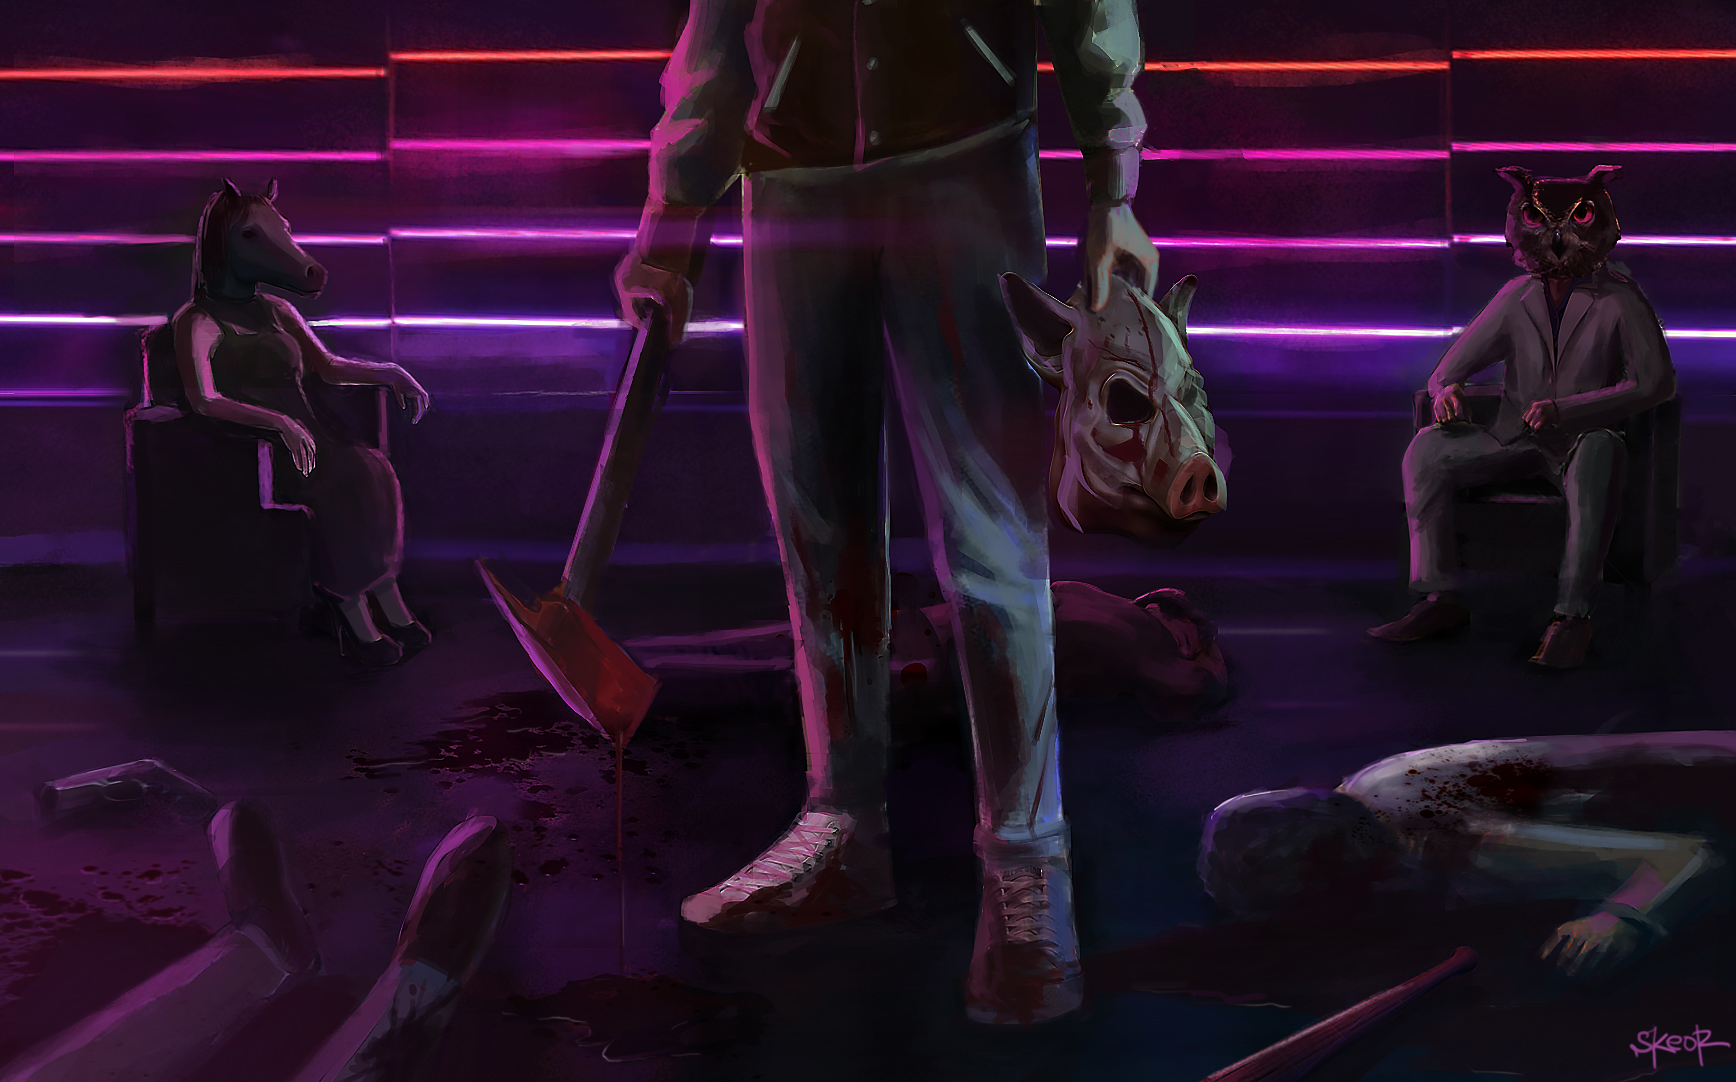 Hotline Miami Hotline Miami 2 Wrong Number Mask Retro Wave Neon Blood Wallpaper:1736x1082